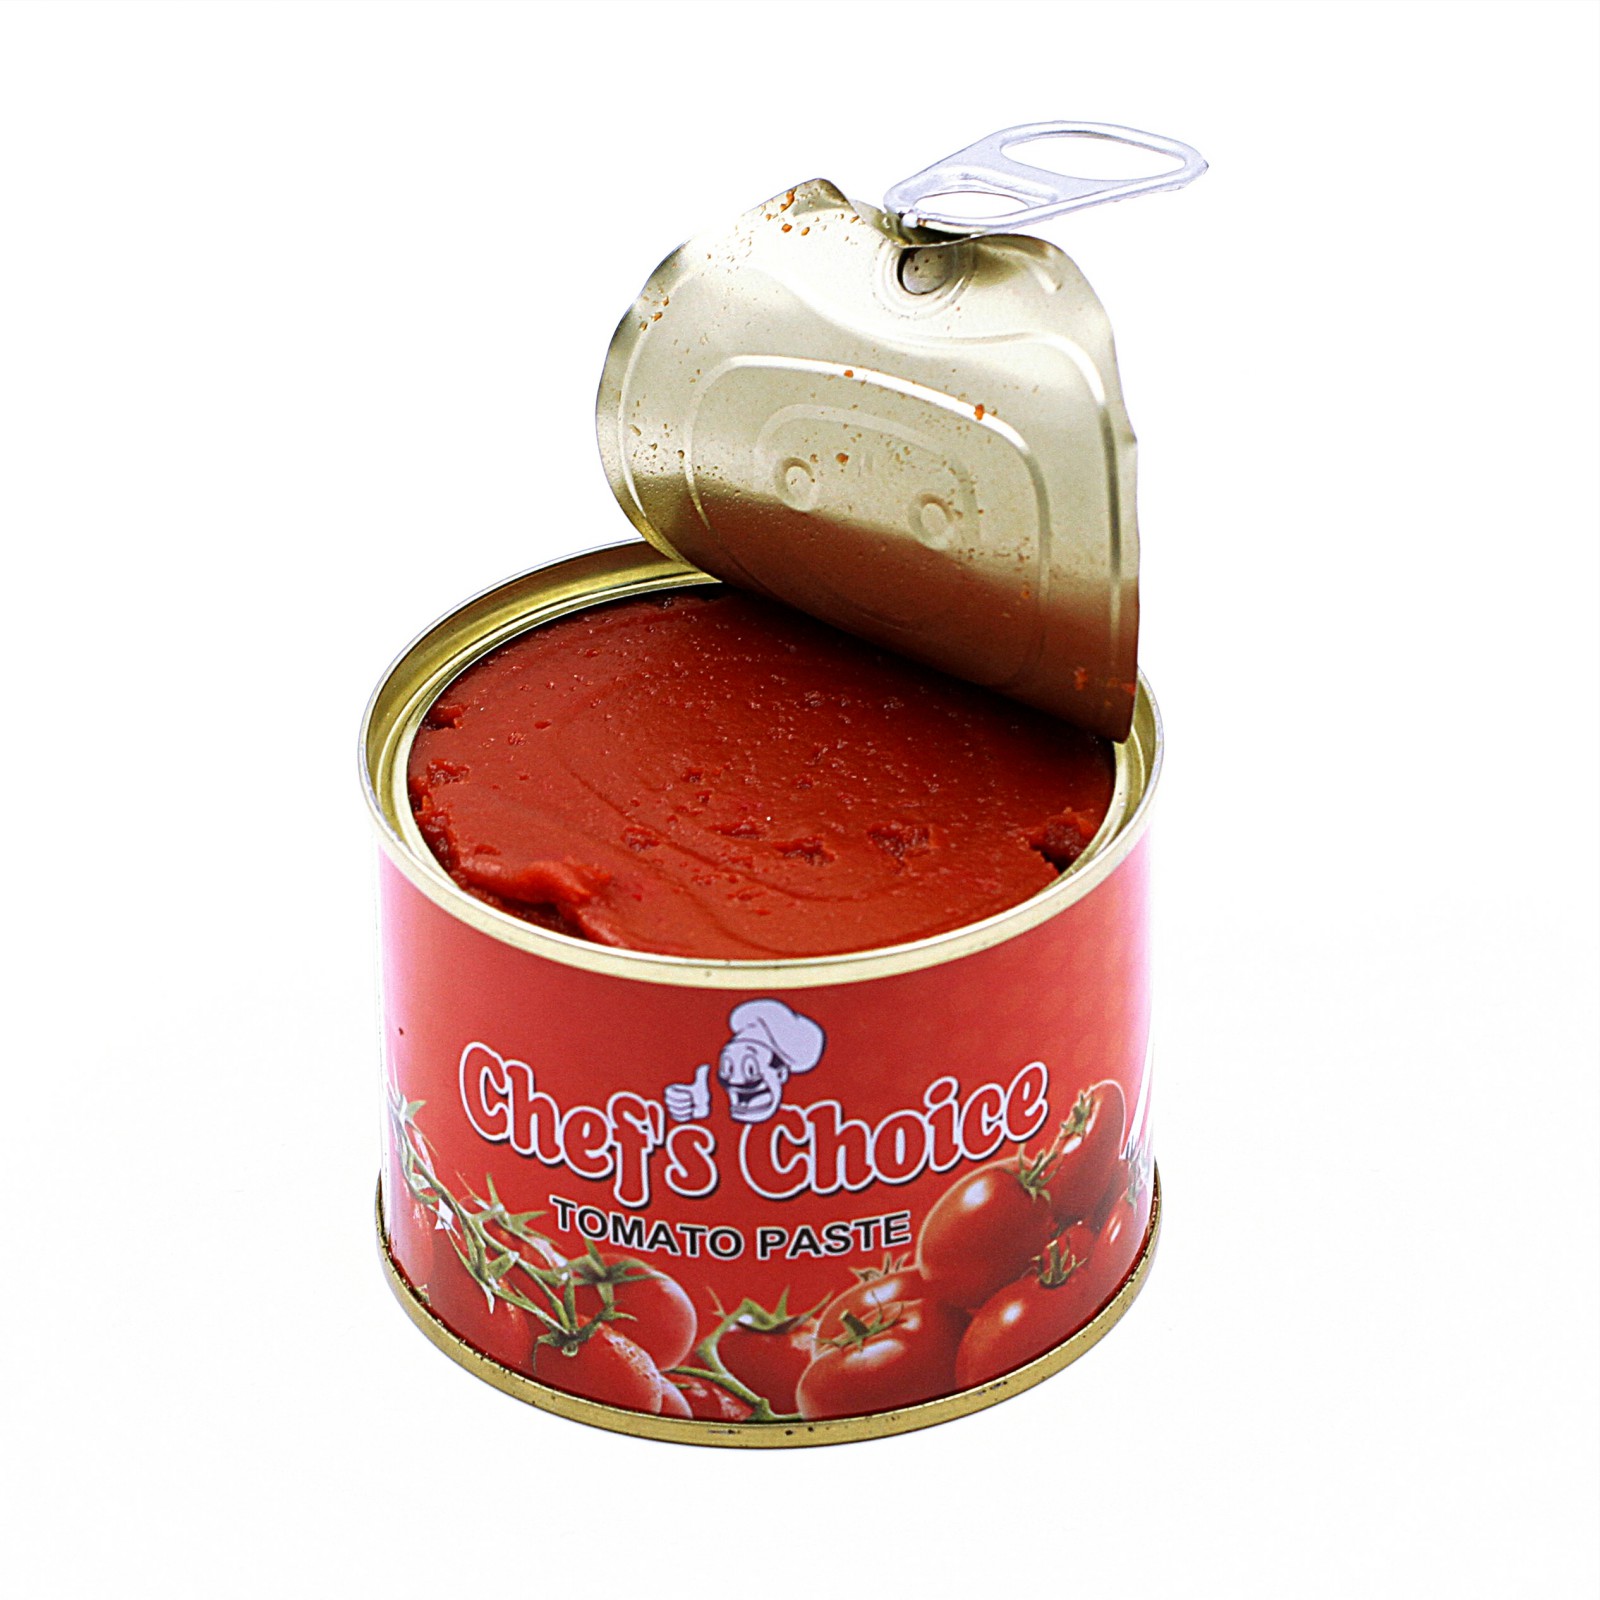 Canned tomato paste 210g